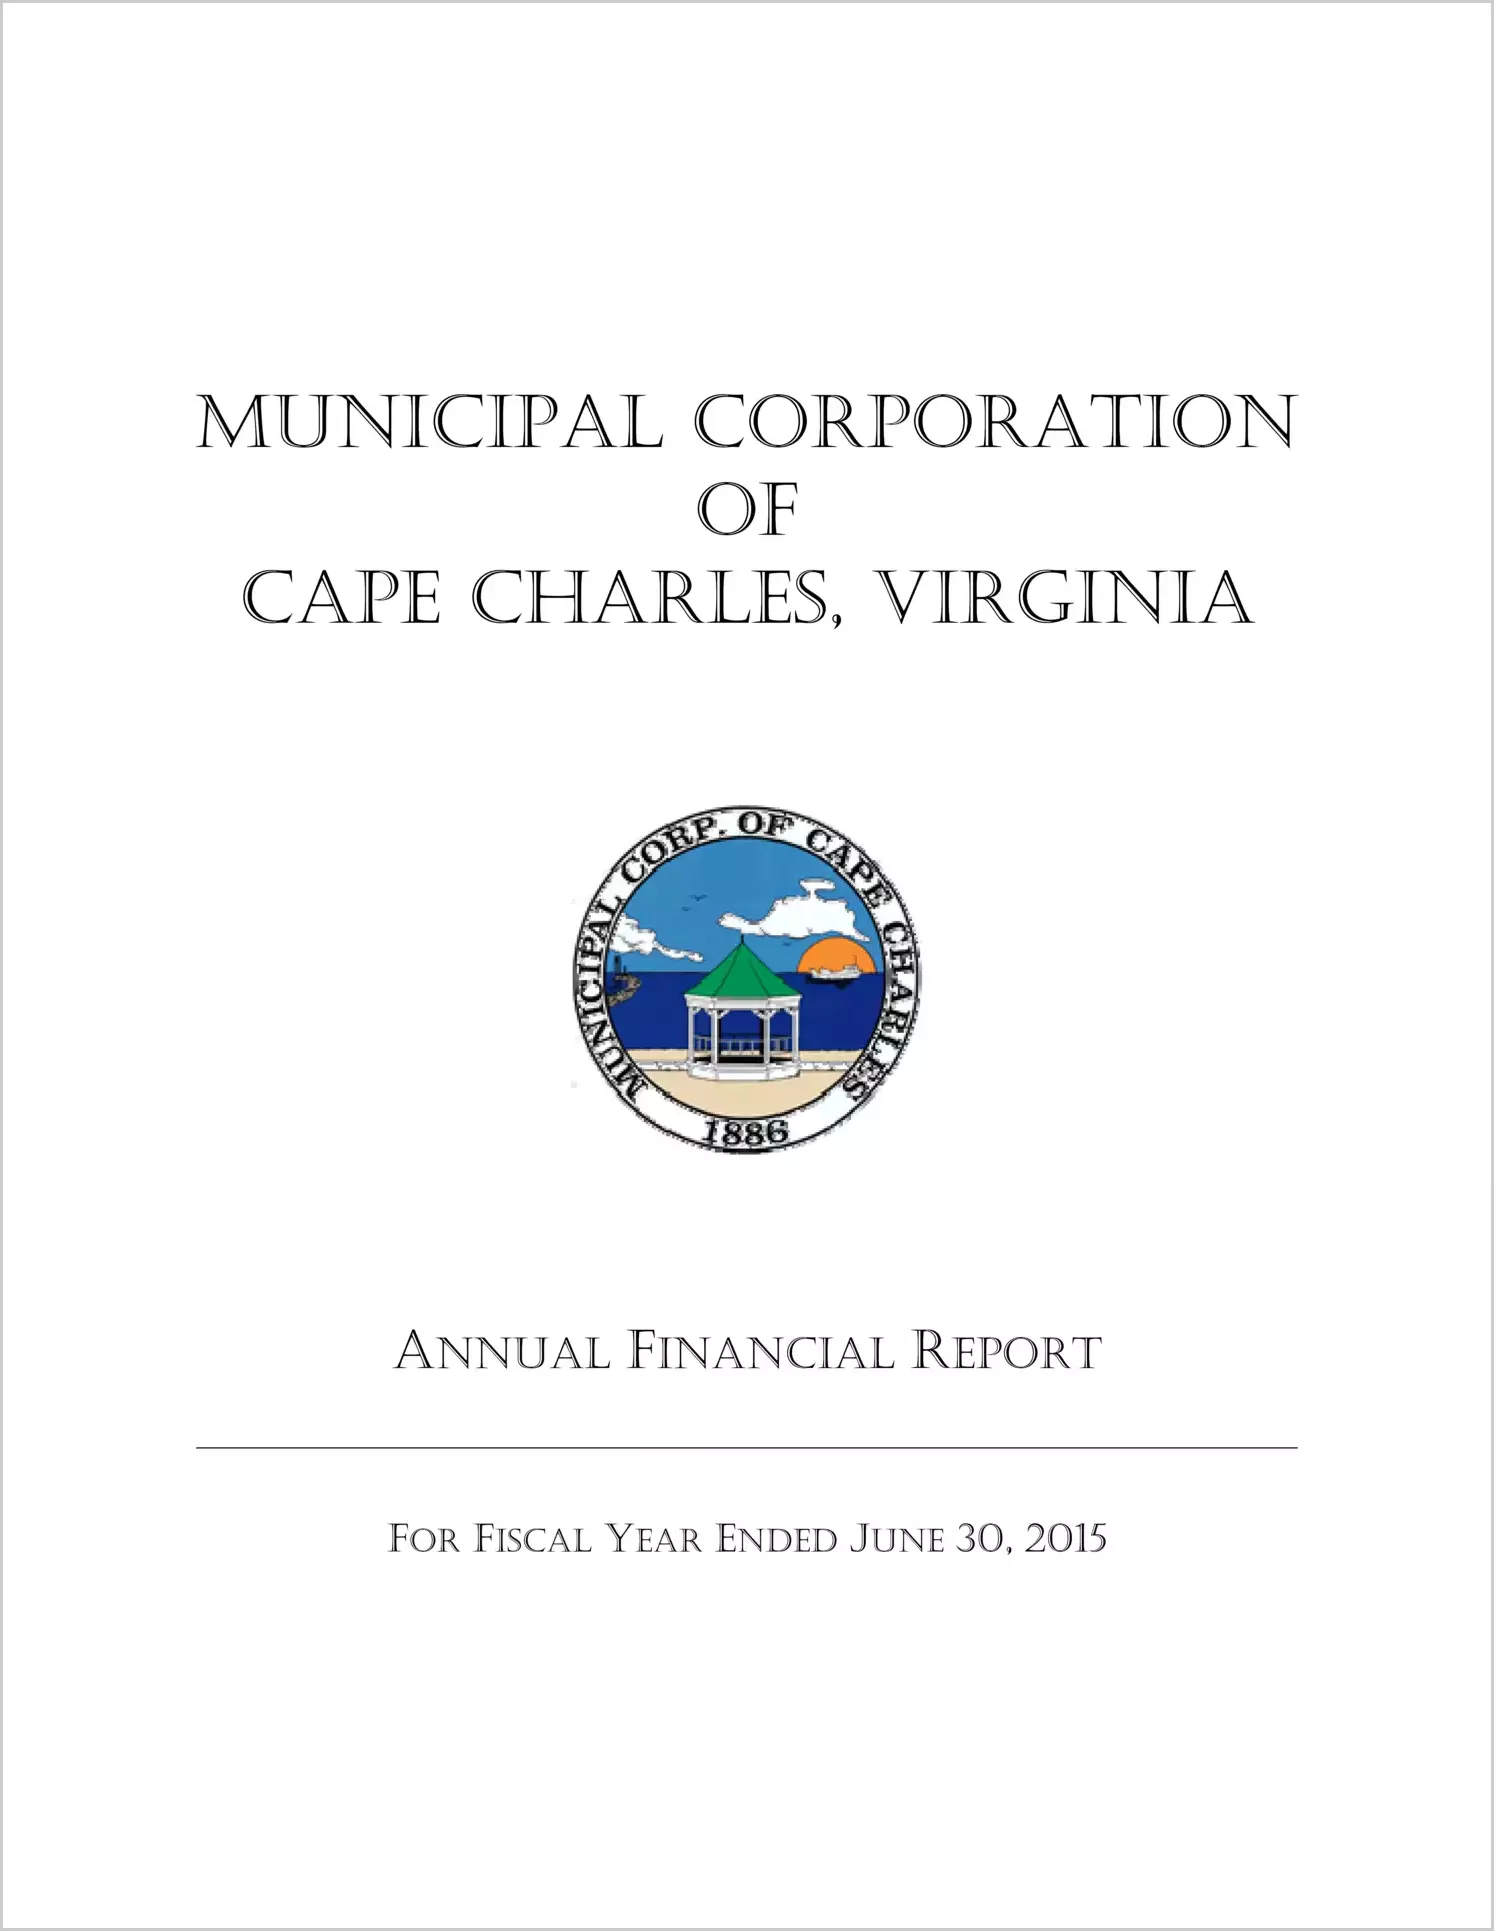 2015 Annual Financial Report for Town of Cape Charles